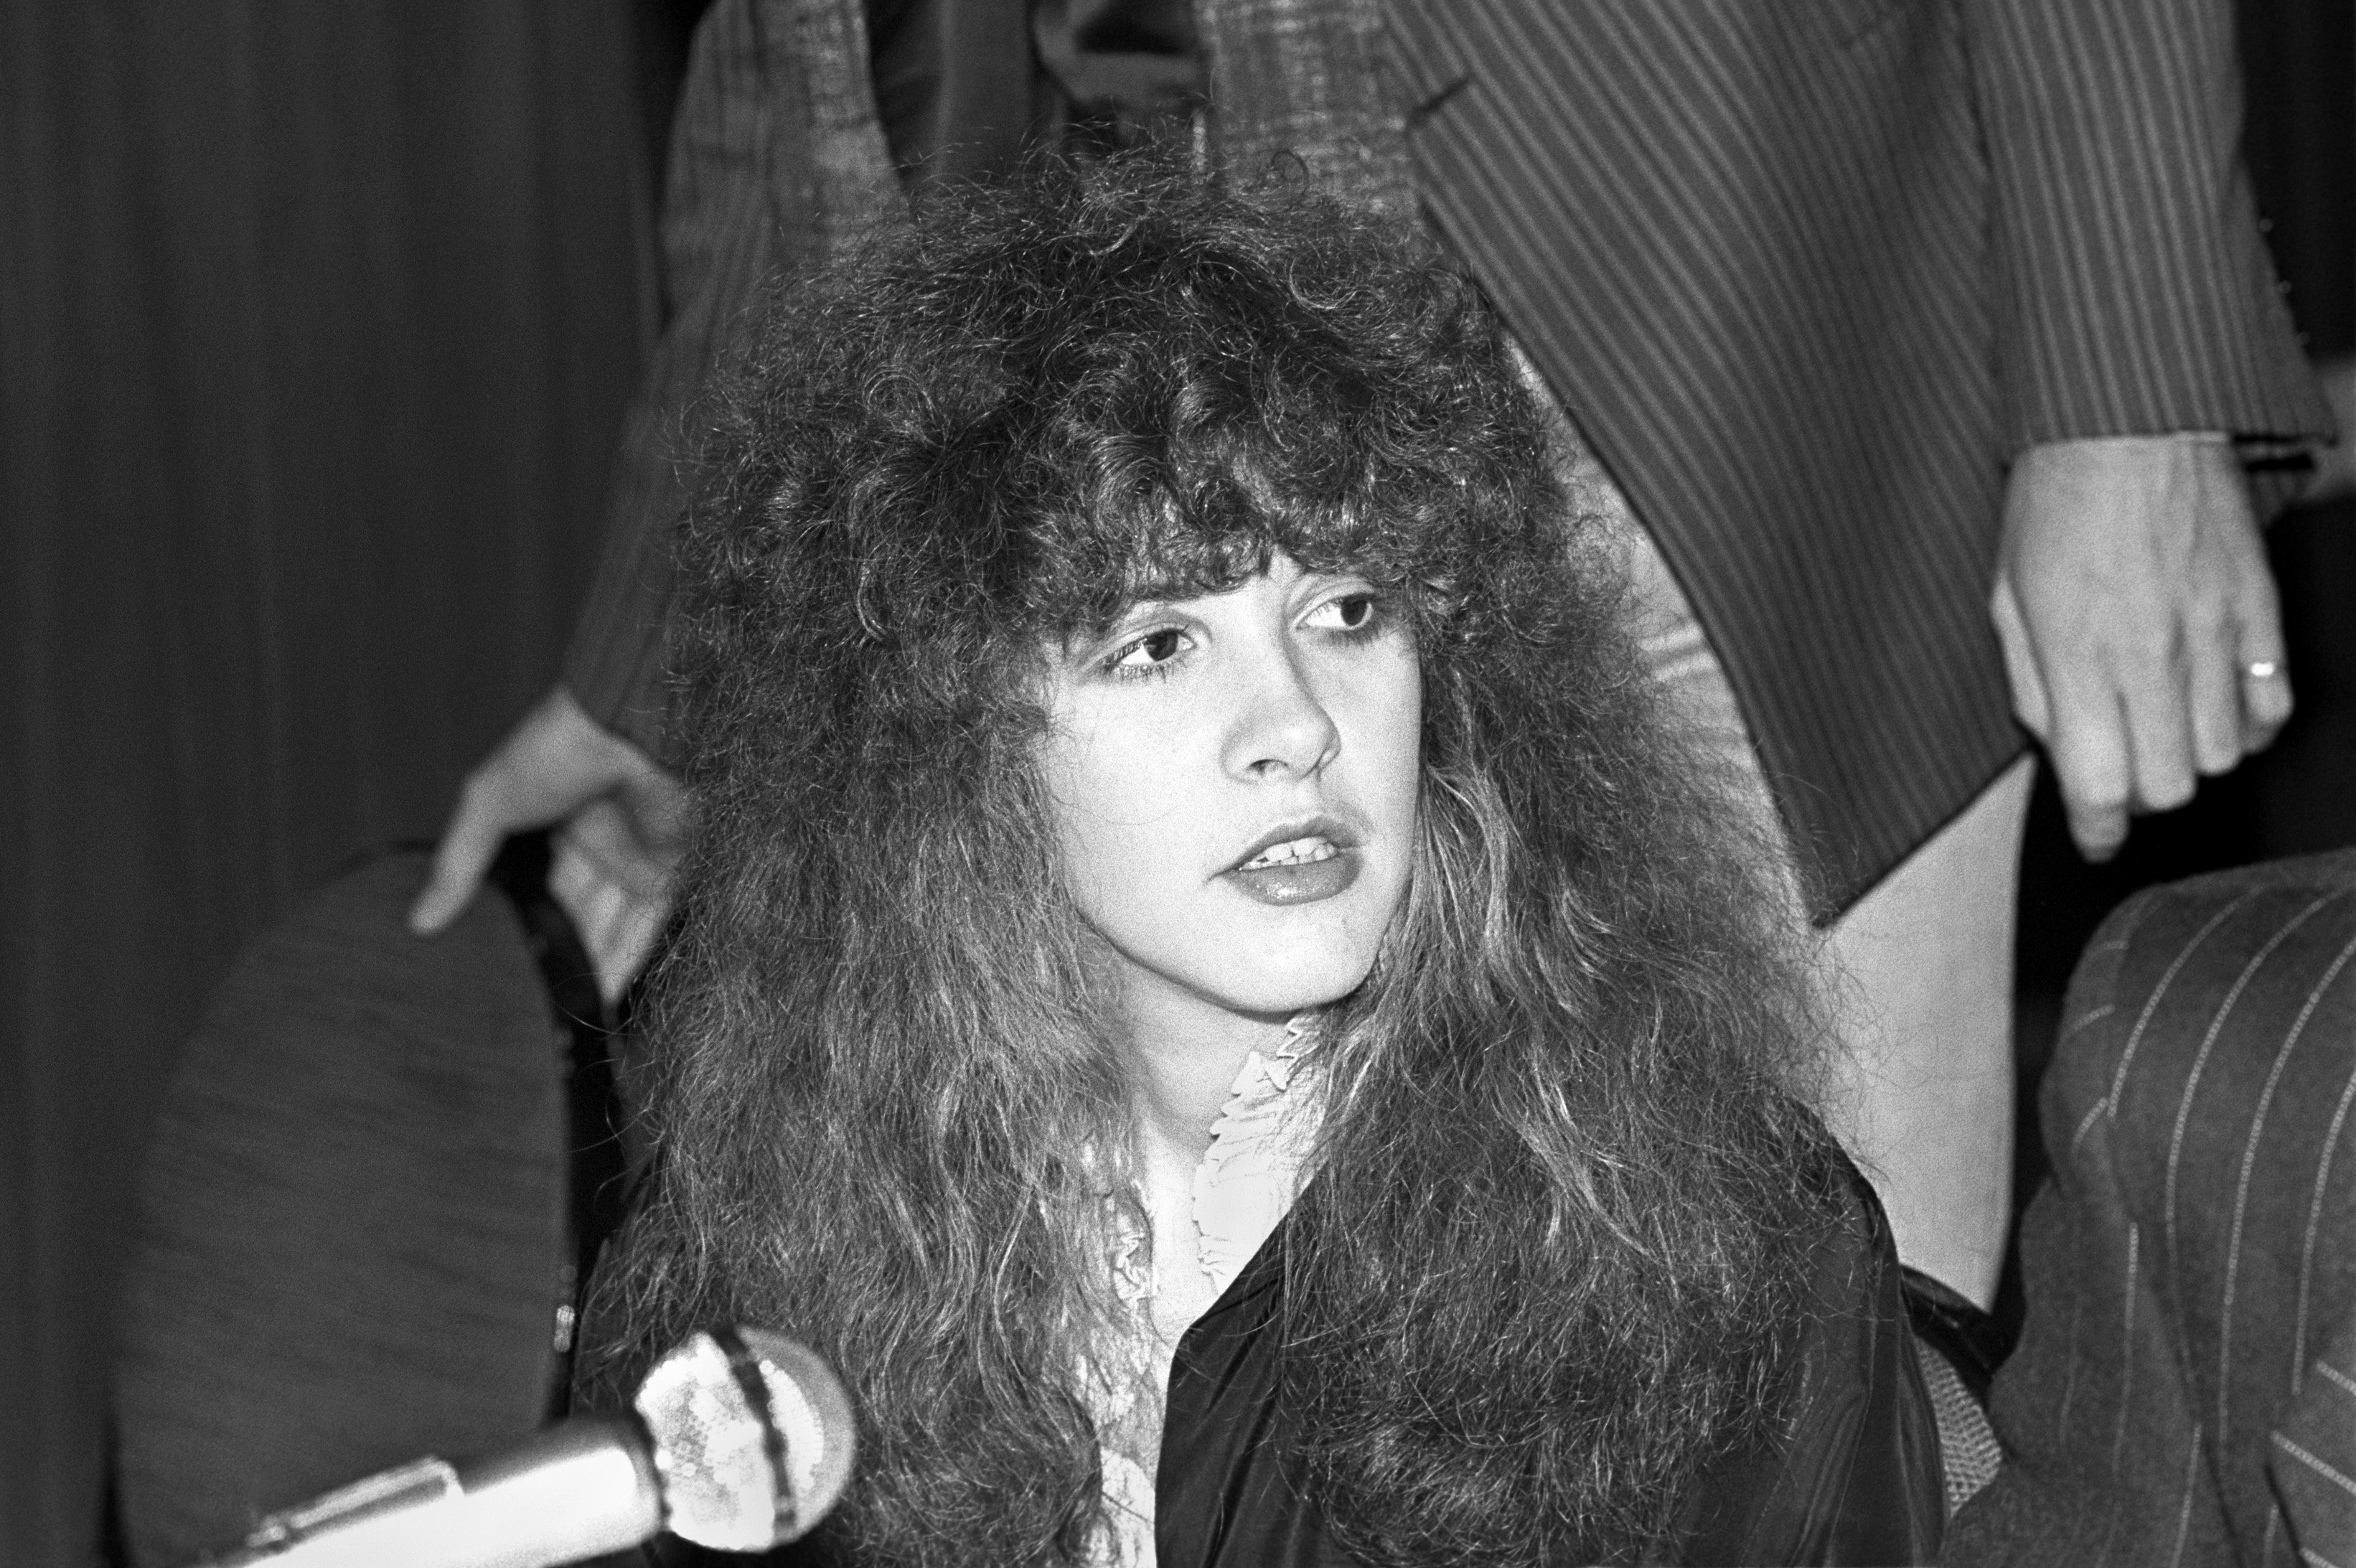 A black and white photo of Stevie Nicks wearing a white shirt and black sweater and sitting in front of a microphone.